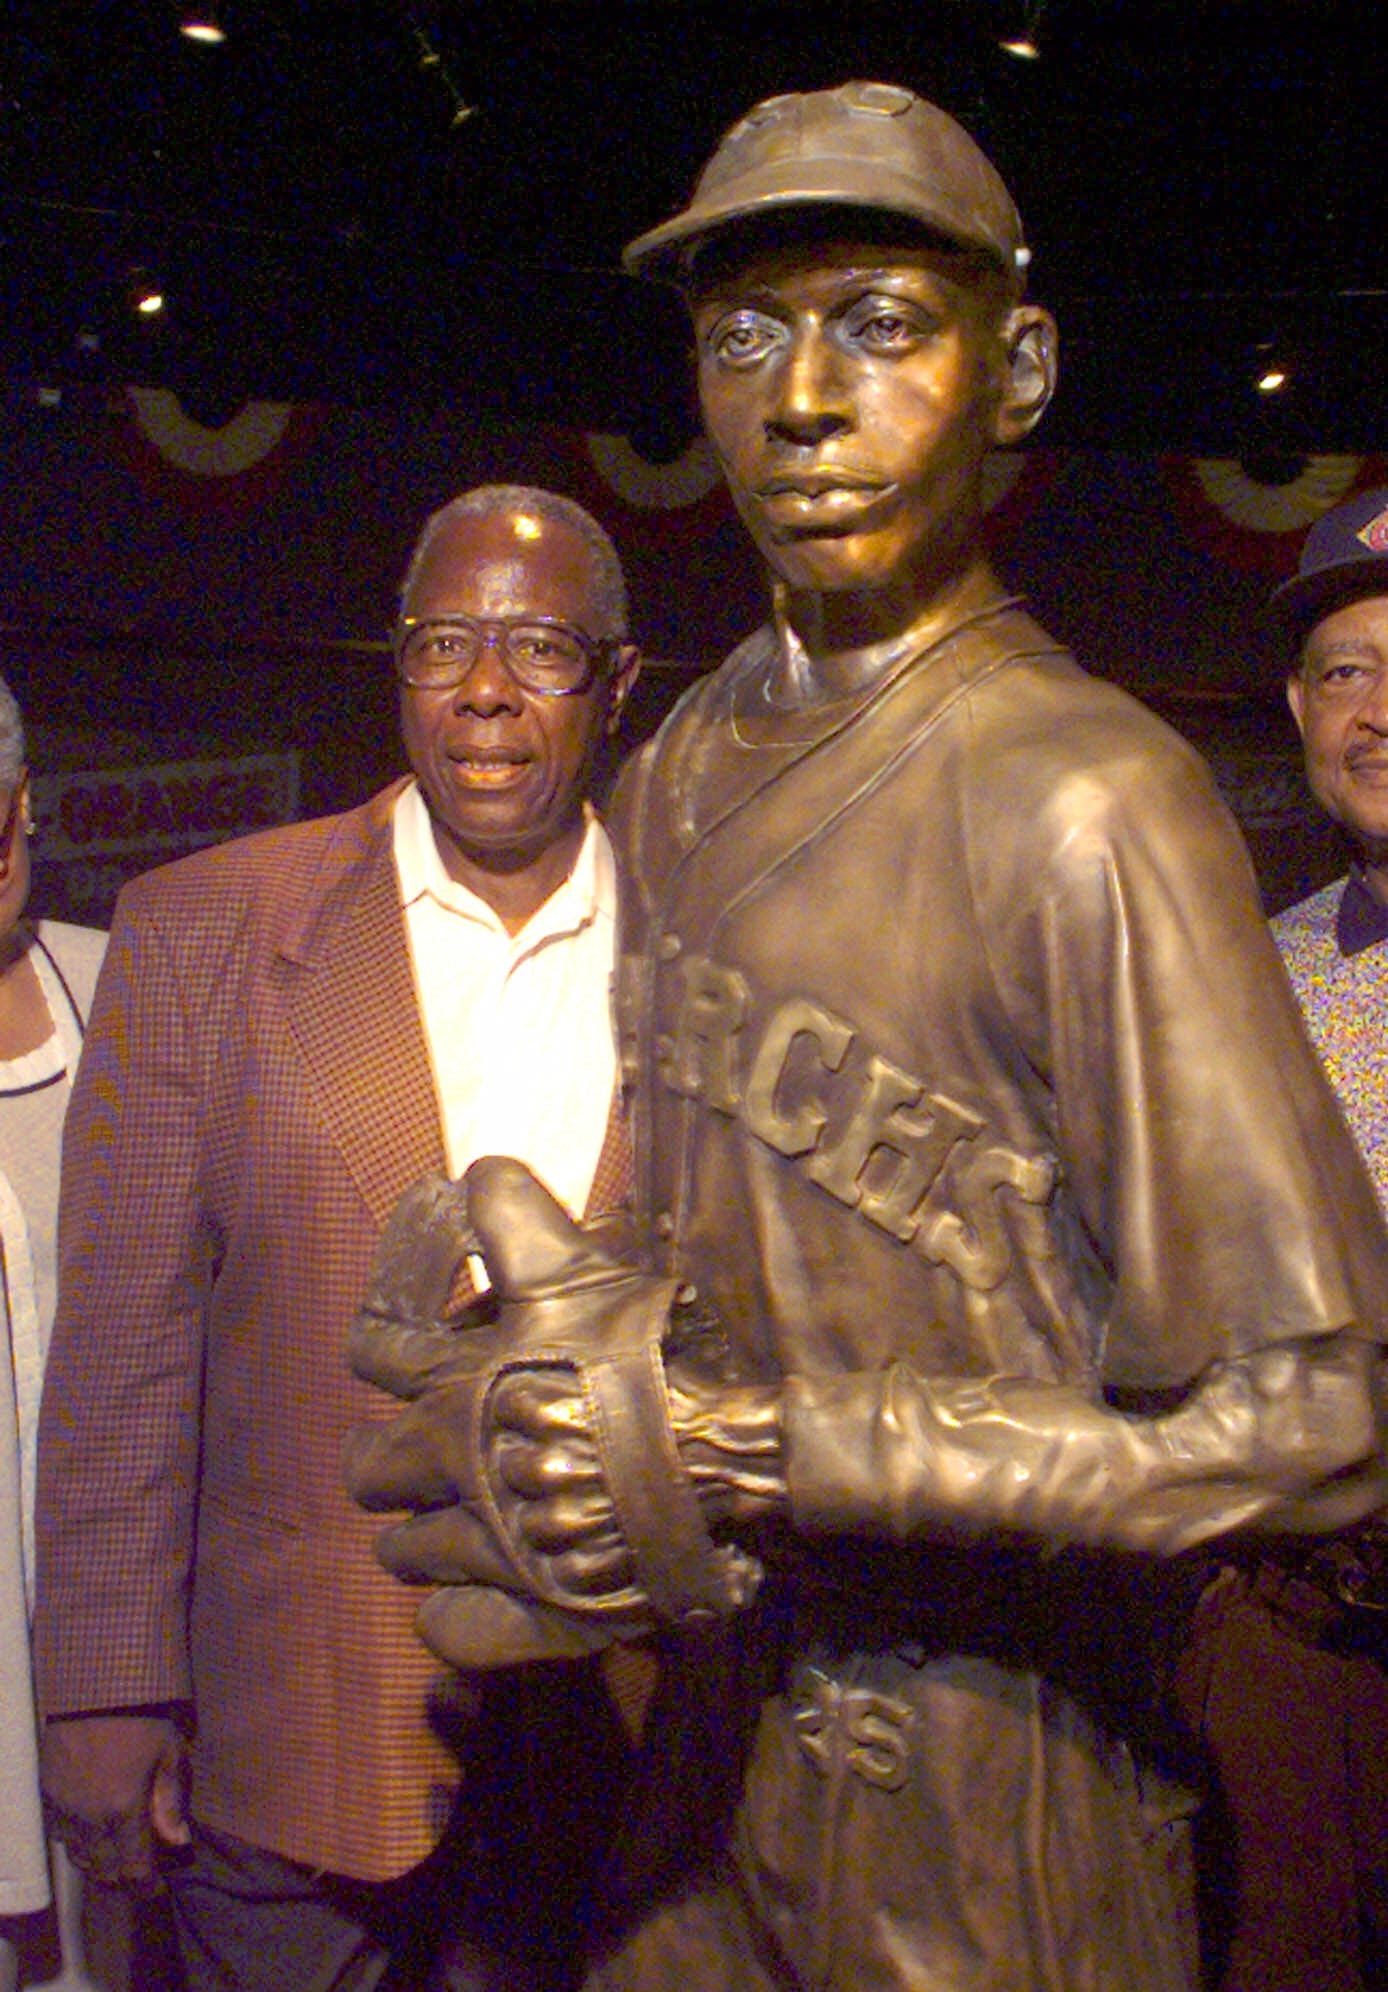 Hank Aaron never forgot his short time in the Negro Leagues